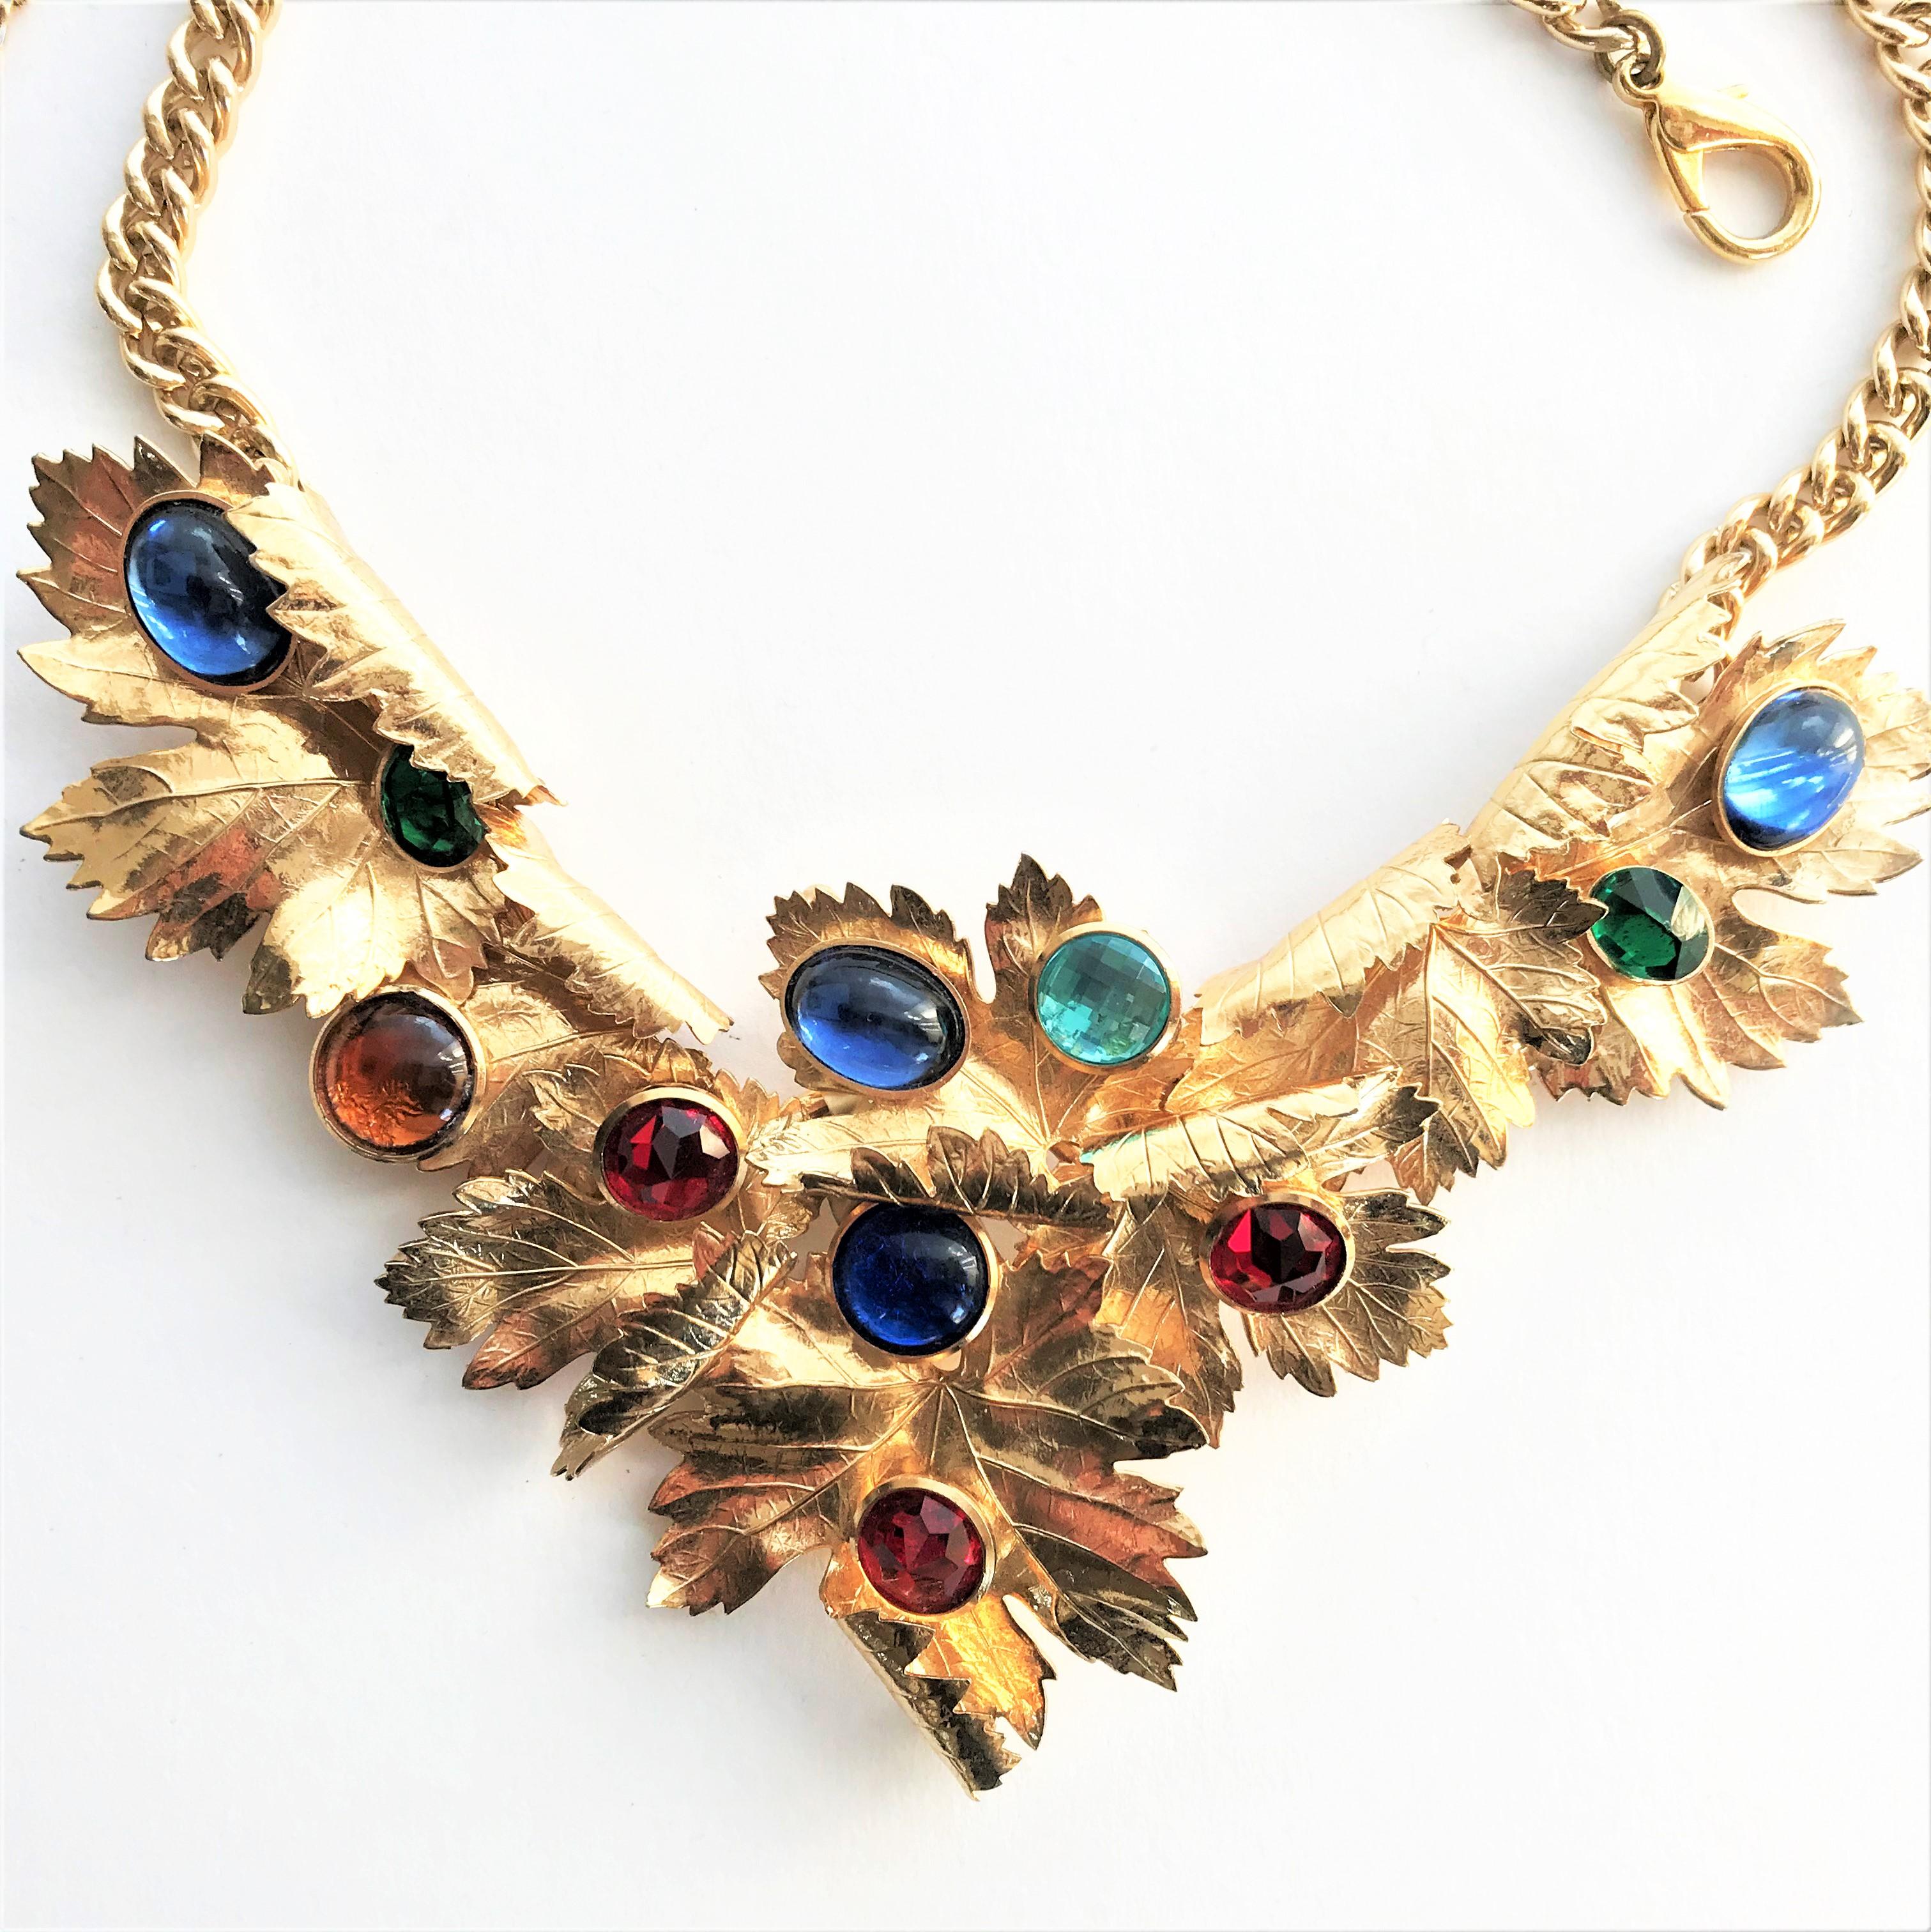 Very interesting, beautiful Christian Dior necklace consisting of 7 maple leaves, each set with a set of rhinestones. Some of the stones are cut or round. Each leaf is rolled up on one side and the leaf veins are nicely v
Very interesting, beautiful